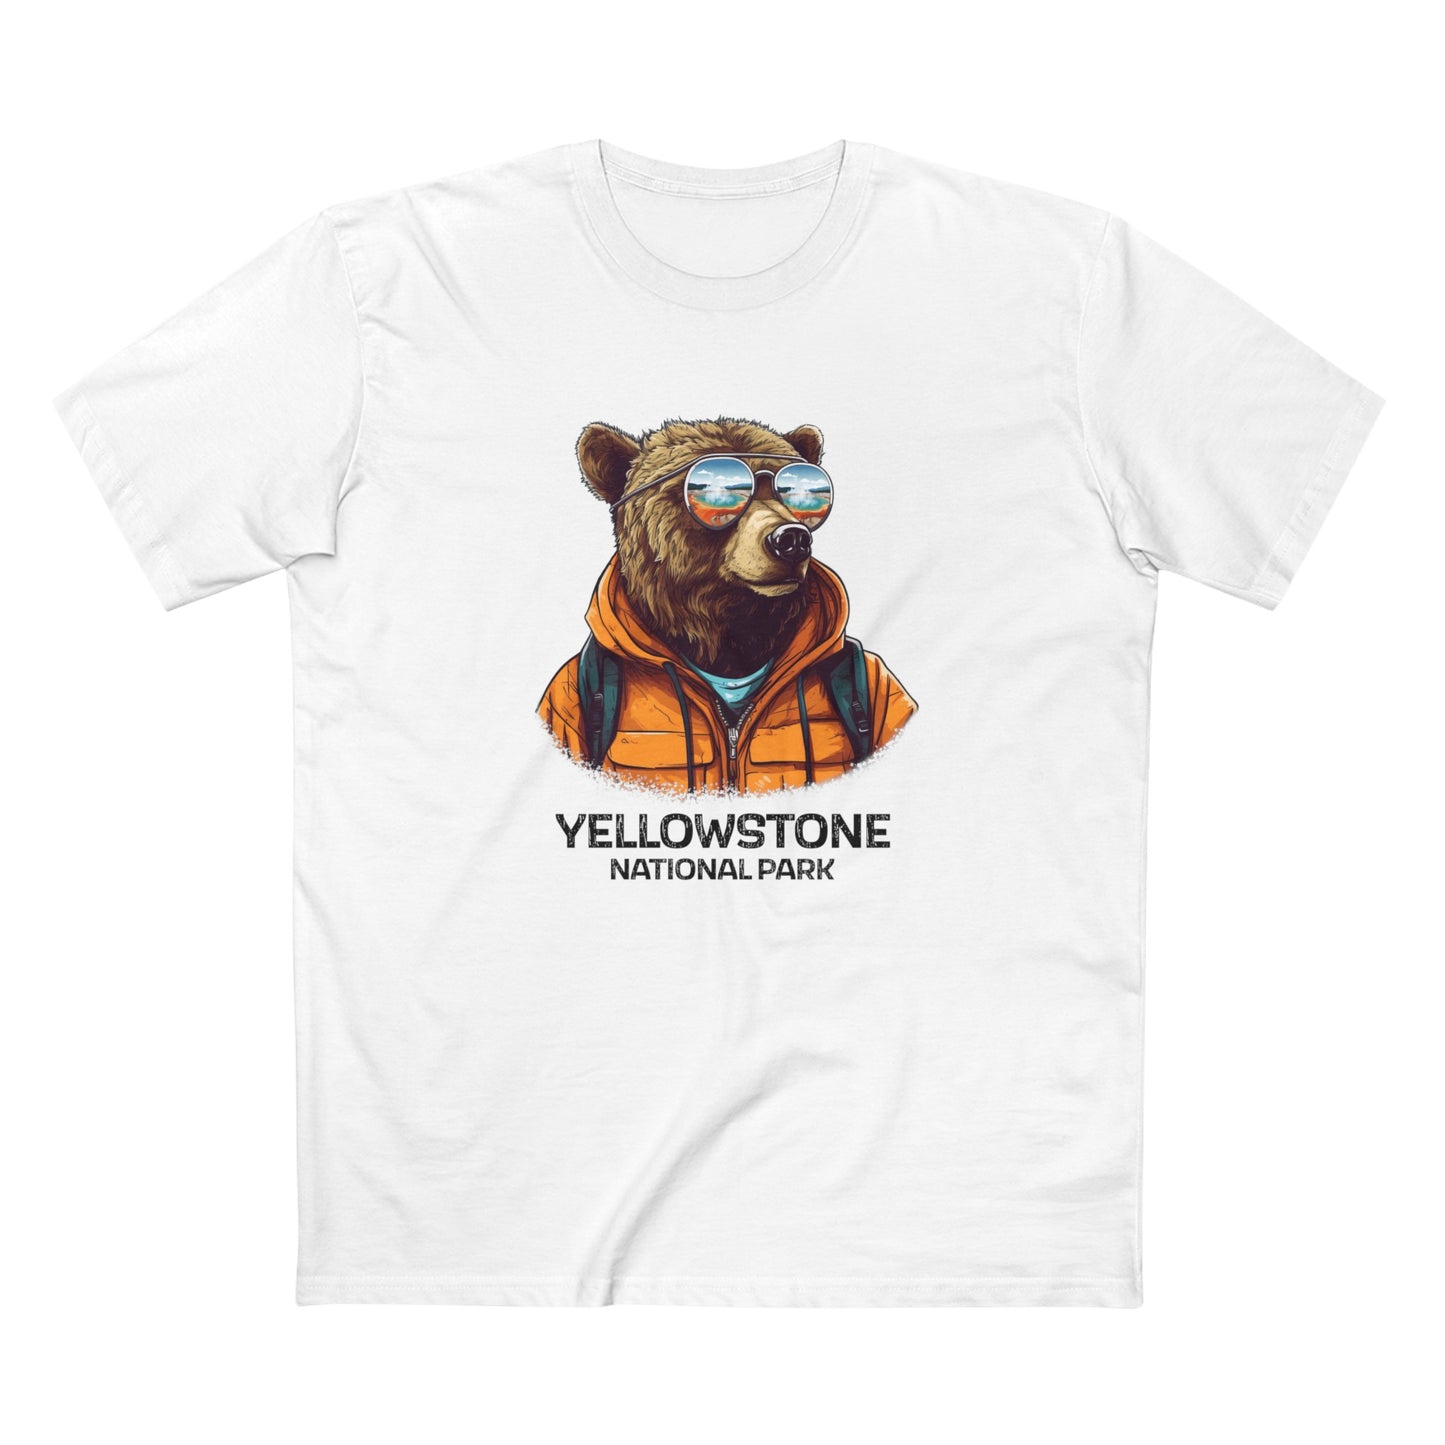 Yellowstone National Park T-Shirt - Grizzly Bear